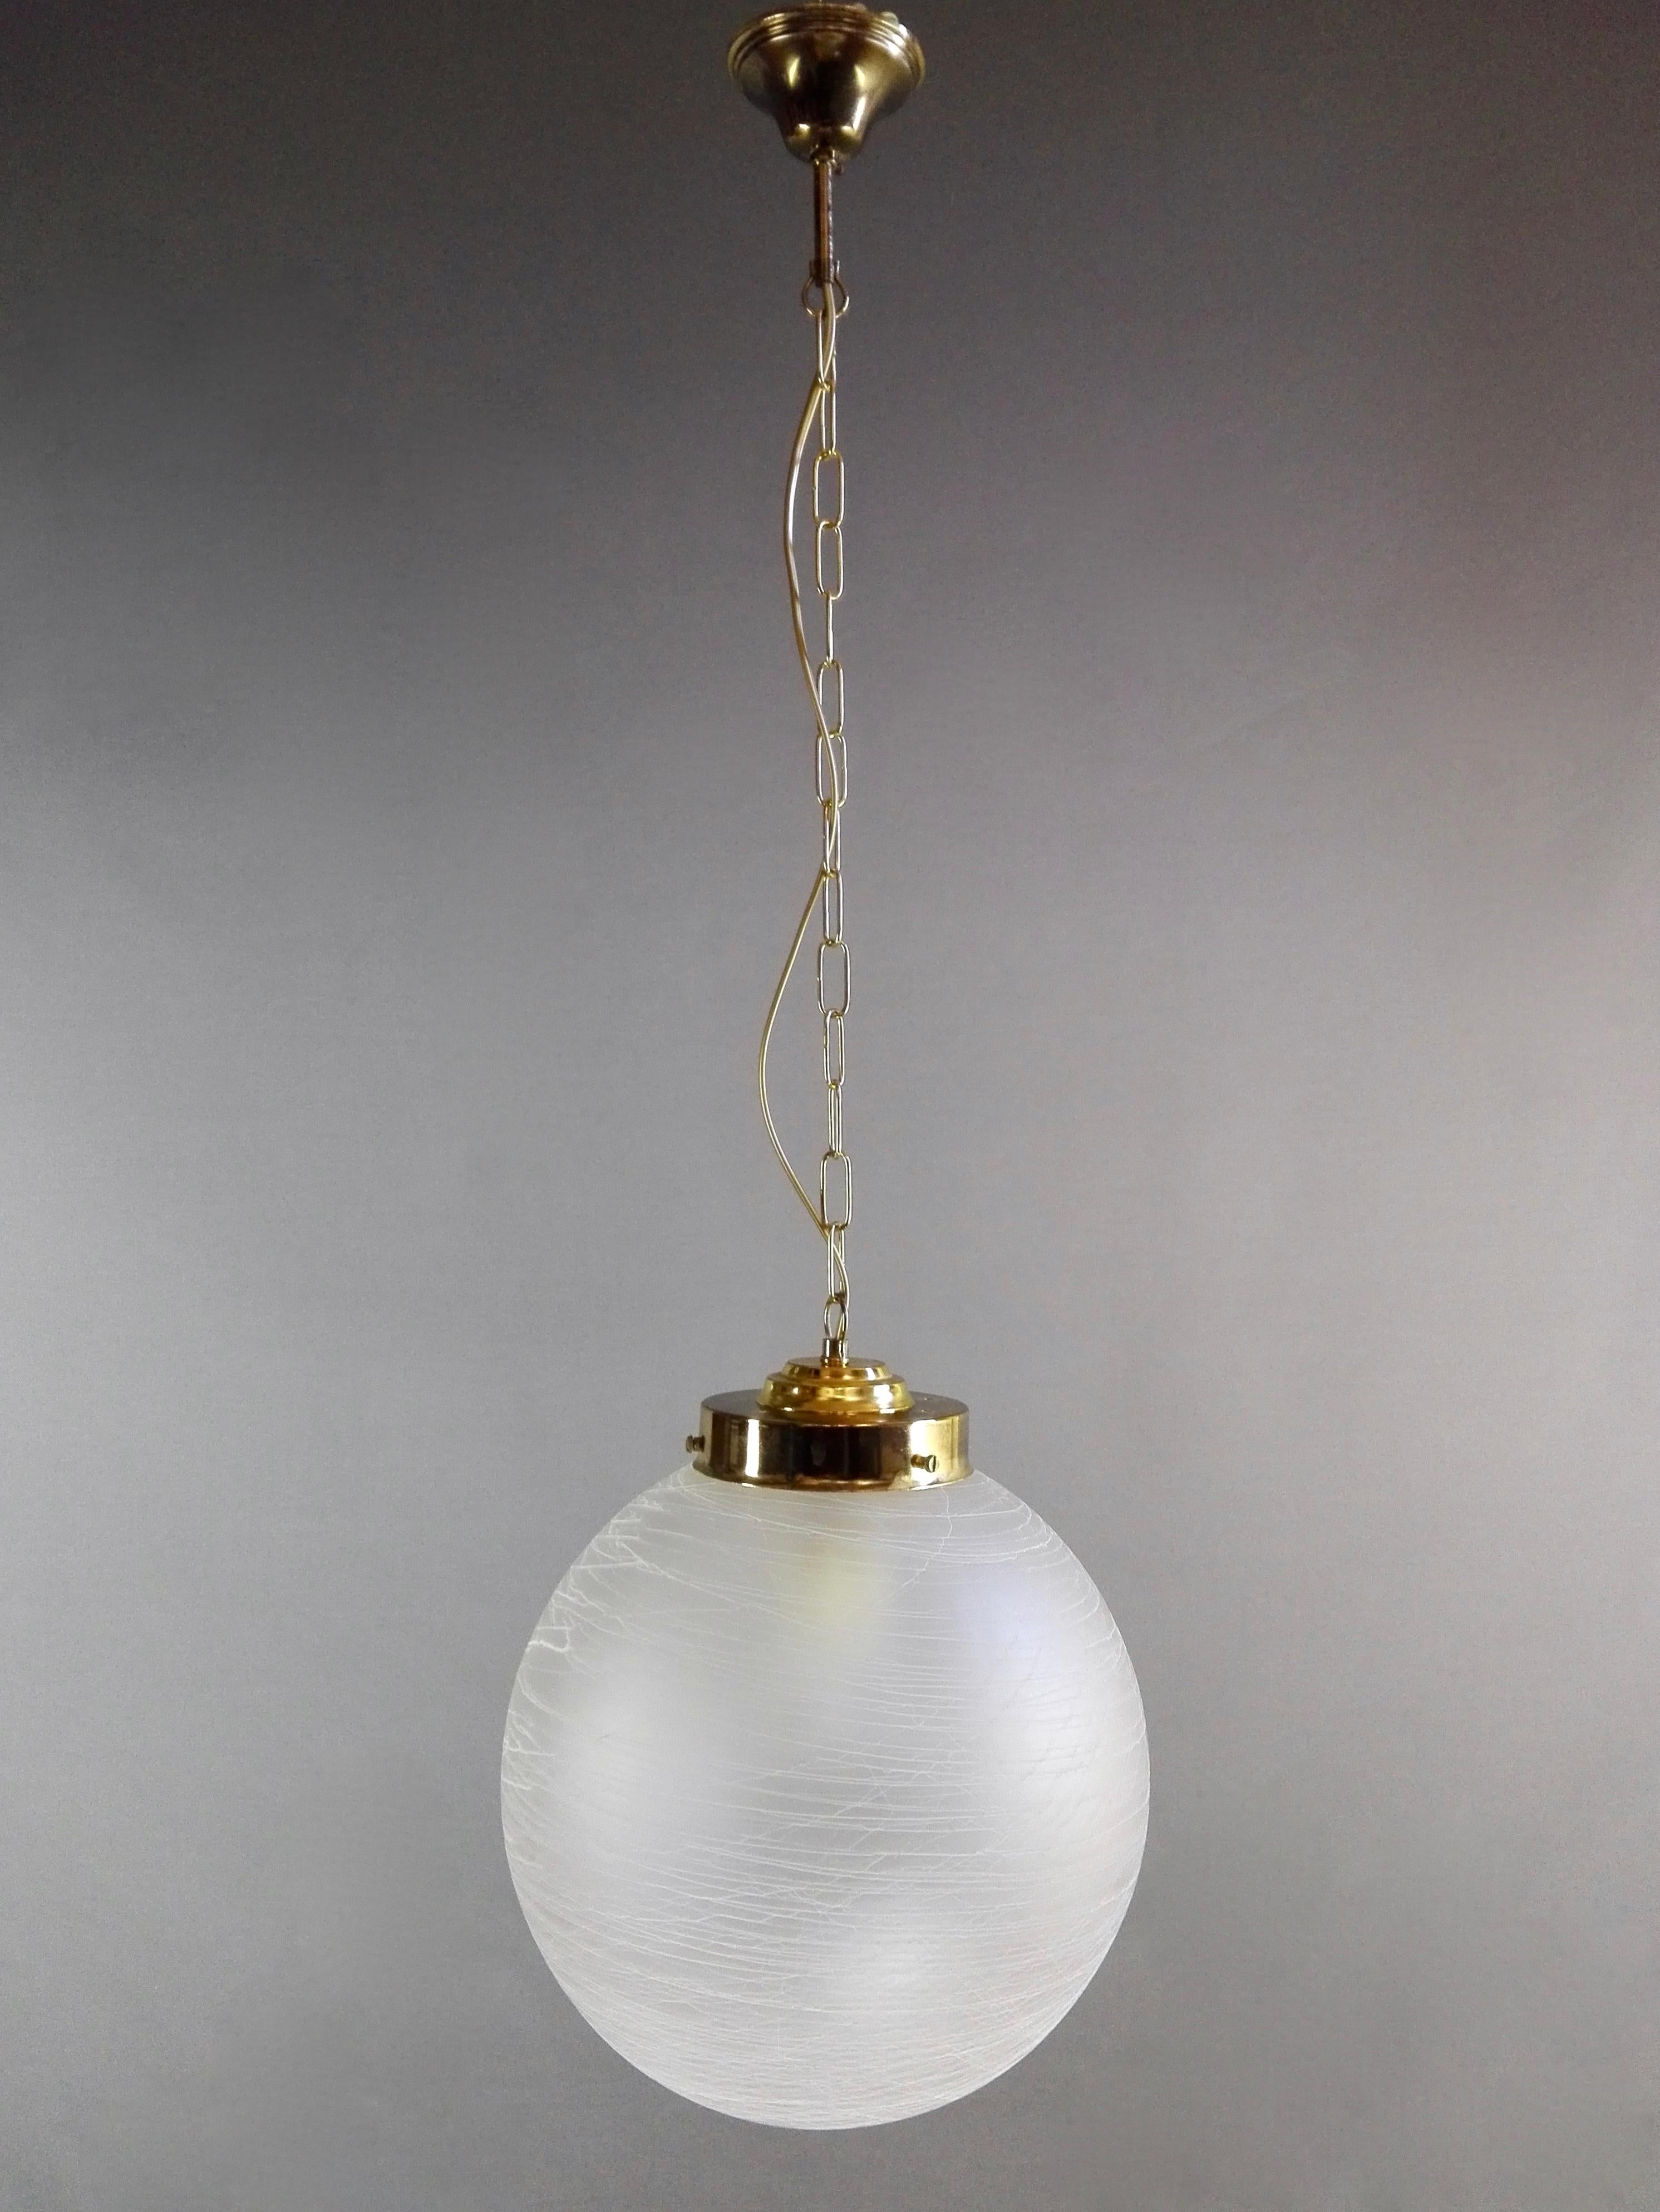 A beautiful hand-blown Murano glass pendant lamp from the 1970s. The clear etched glass bowl has a dense workmanship on its entire surface with thin filaments in relief of white and blue glass that wrap around it, creating a unique effect! See